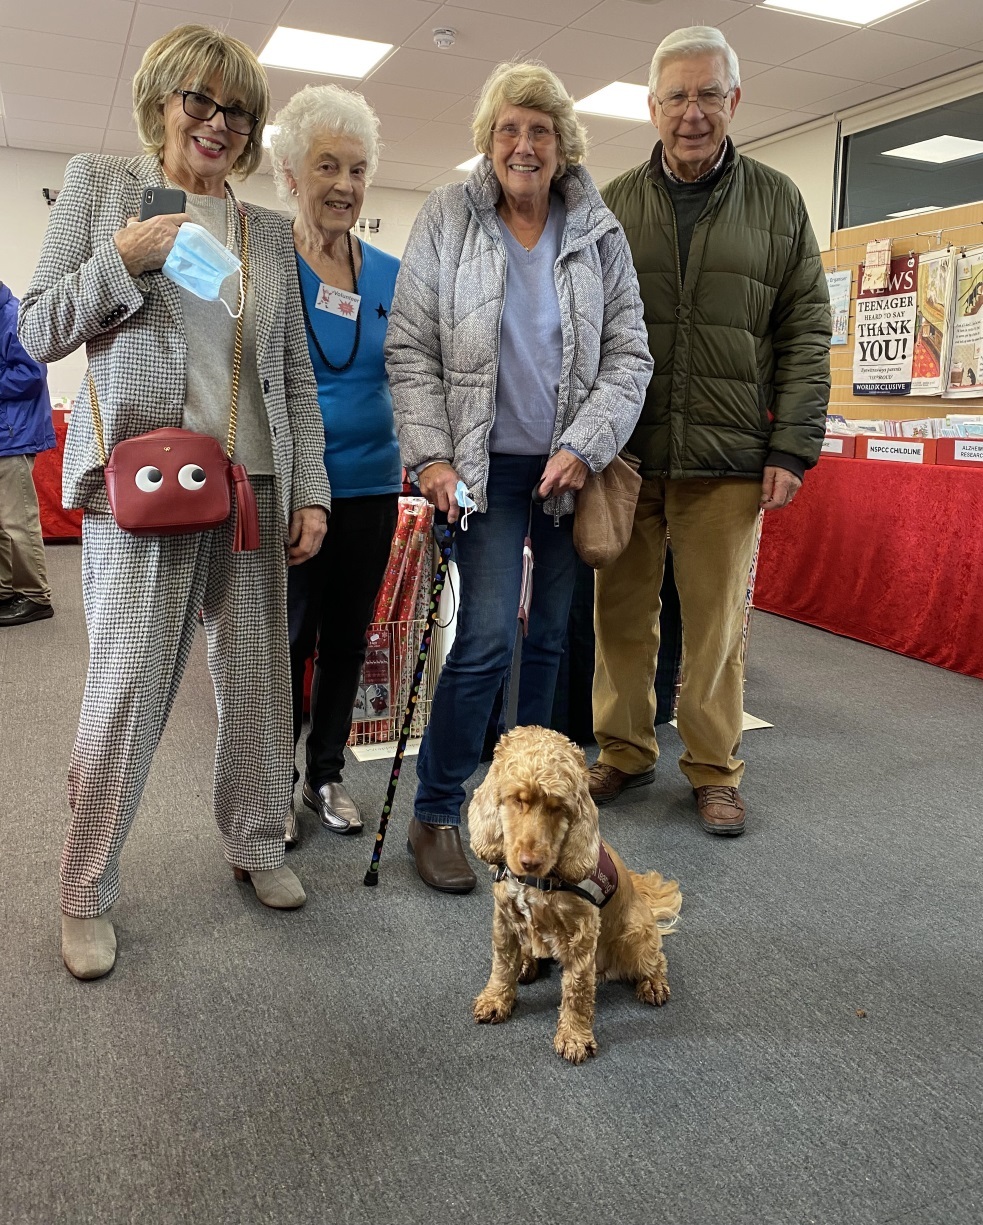 Sue Johnston, Sheila Hallas and Caroline and Terry Reeves with Lady from hearing Dogs for Deaf People